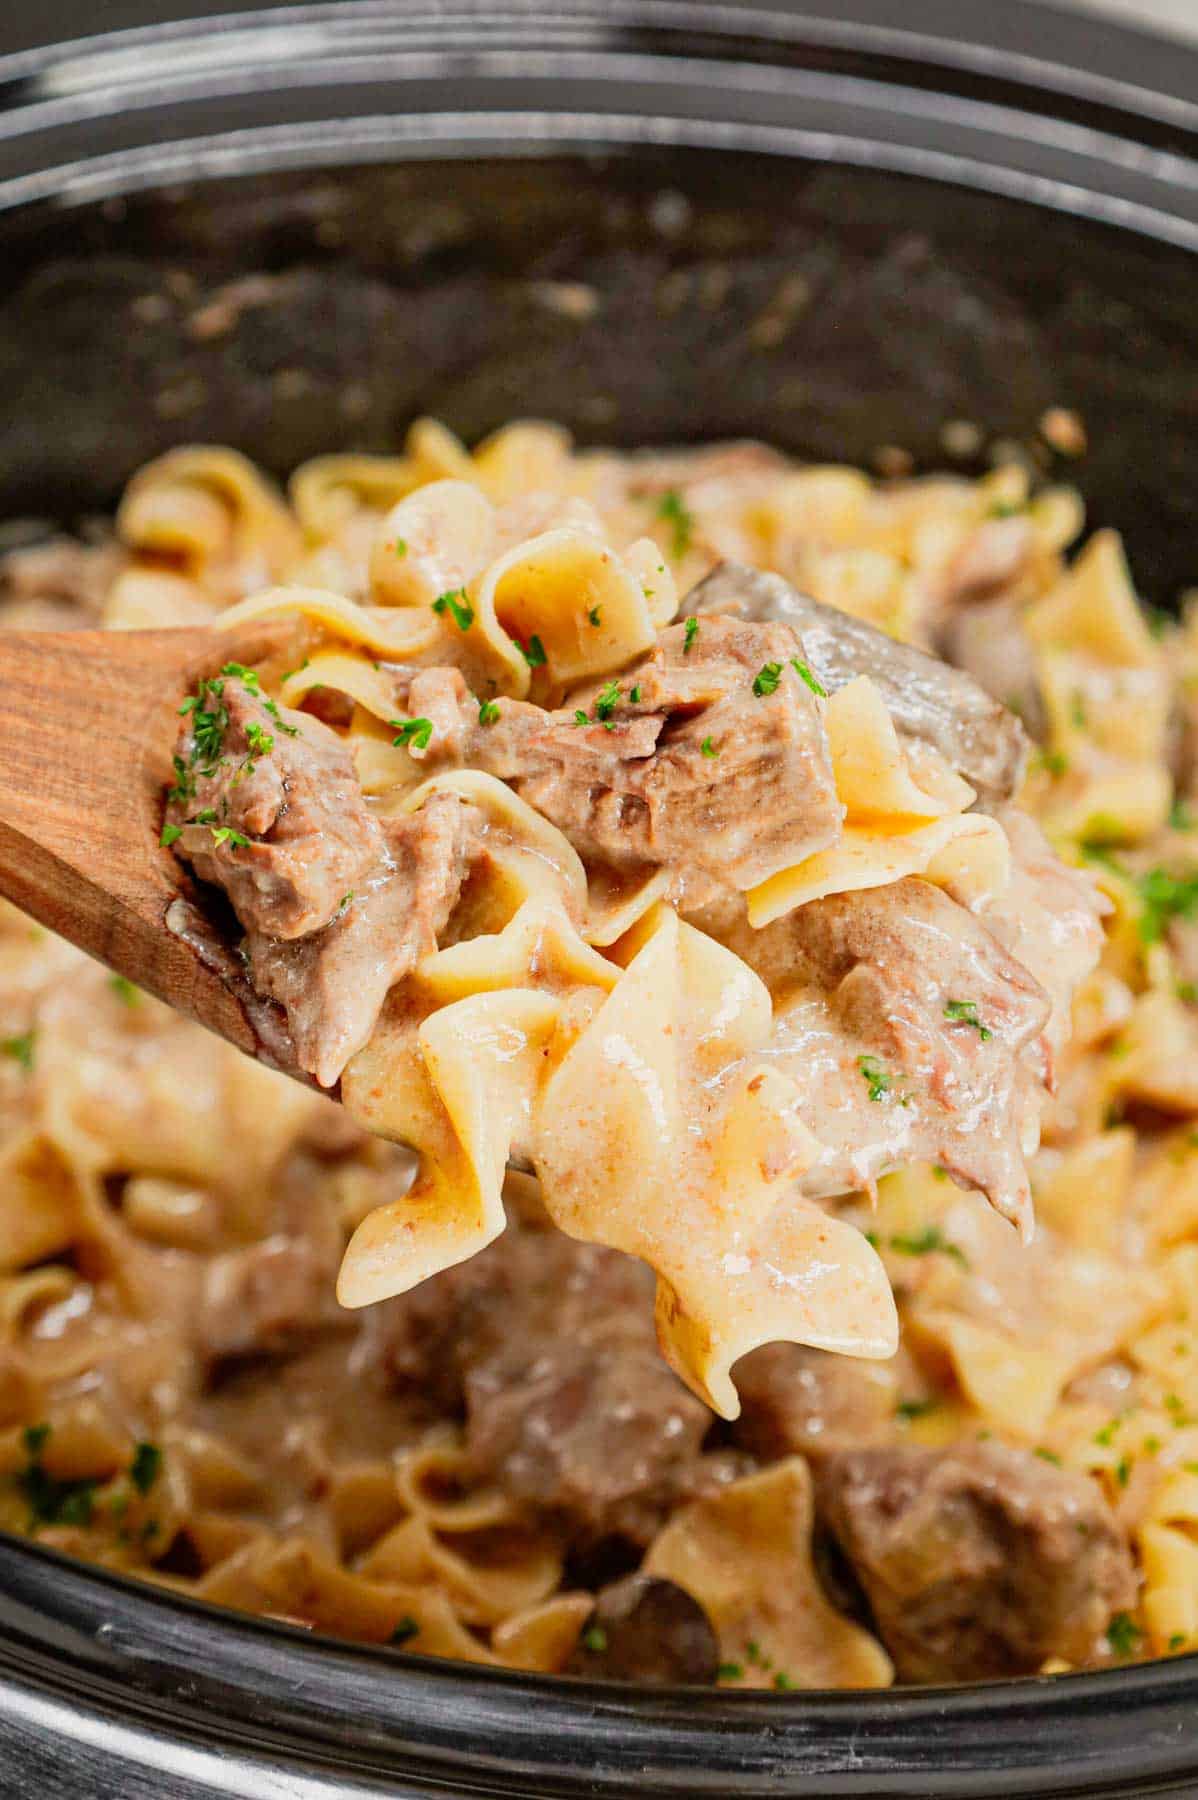 Crock Pot Beef Stroganoff is a hearty slow cooker dinner recipe loaded with tender chunks of stewing beef, sliced mushrooms, onions and egg noodles all in a delicious beef broth and cream of mushroom sauce.